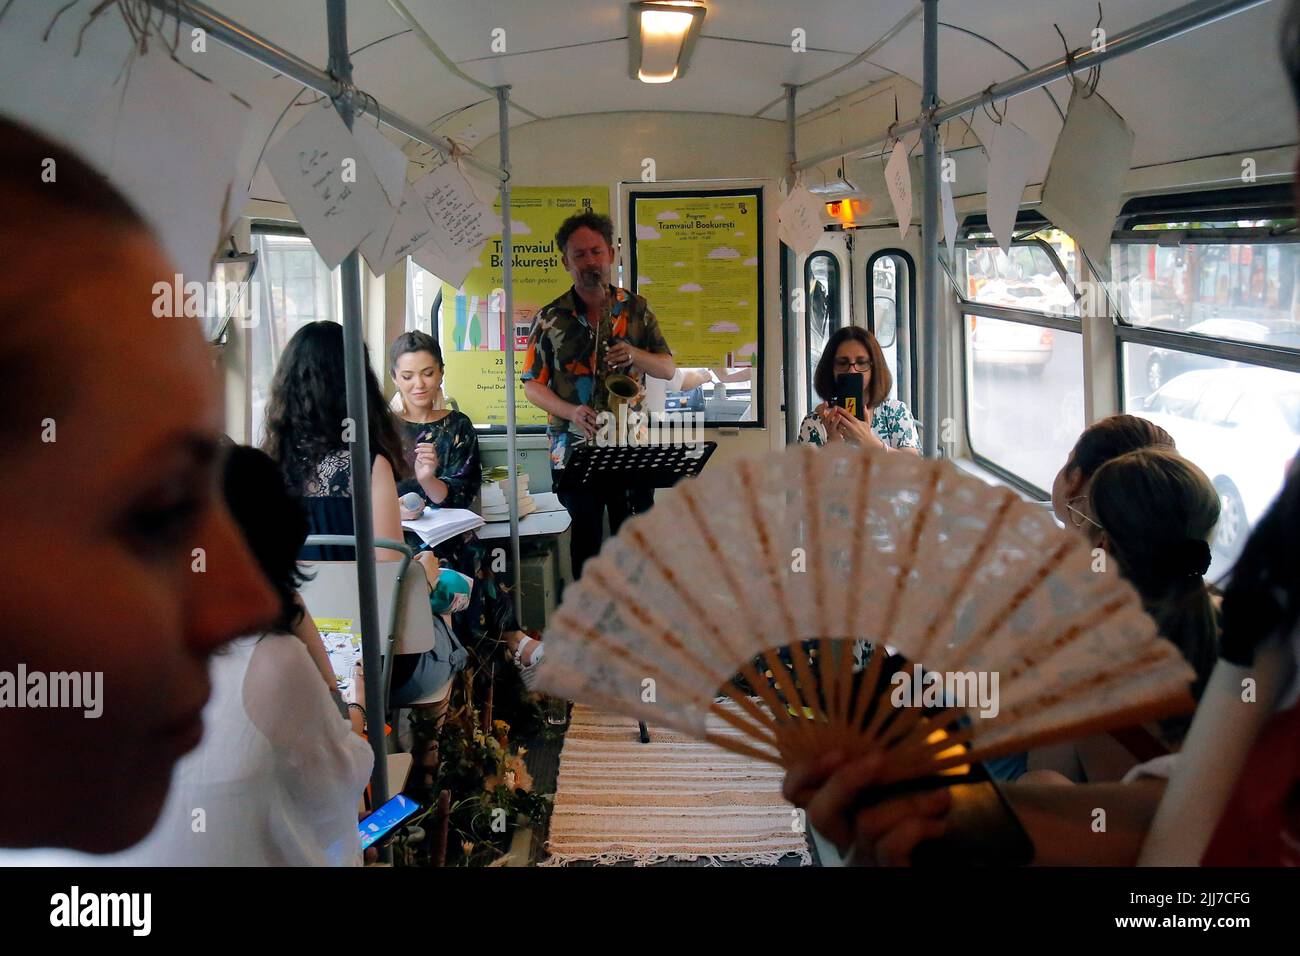 Bucharest, Romania. 23rd July, 2022. People attend a cultural event called 'Tramvaiul Bookuresti' (Bookarest Tramway) in a vintage tram in Bucharest, capital of Romania, July 23, 2022. Organized by the Cultural Centre of the Townhall, the cultural event is hosted in a vintage tramway where people could listen to poetry, music and historic stories about the town during a two-hour trip. Credit: Cristian Cristel/Xinhua/Alamy Live News Stock Photo